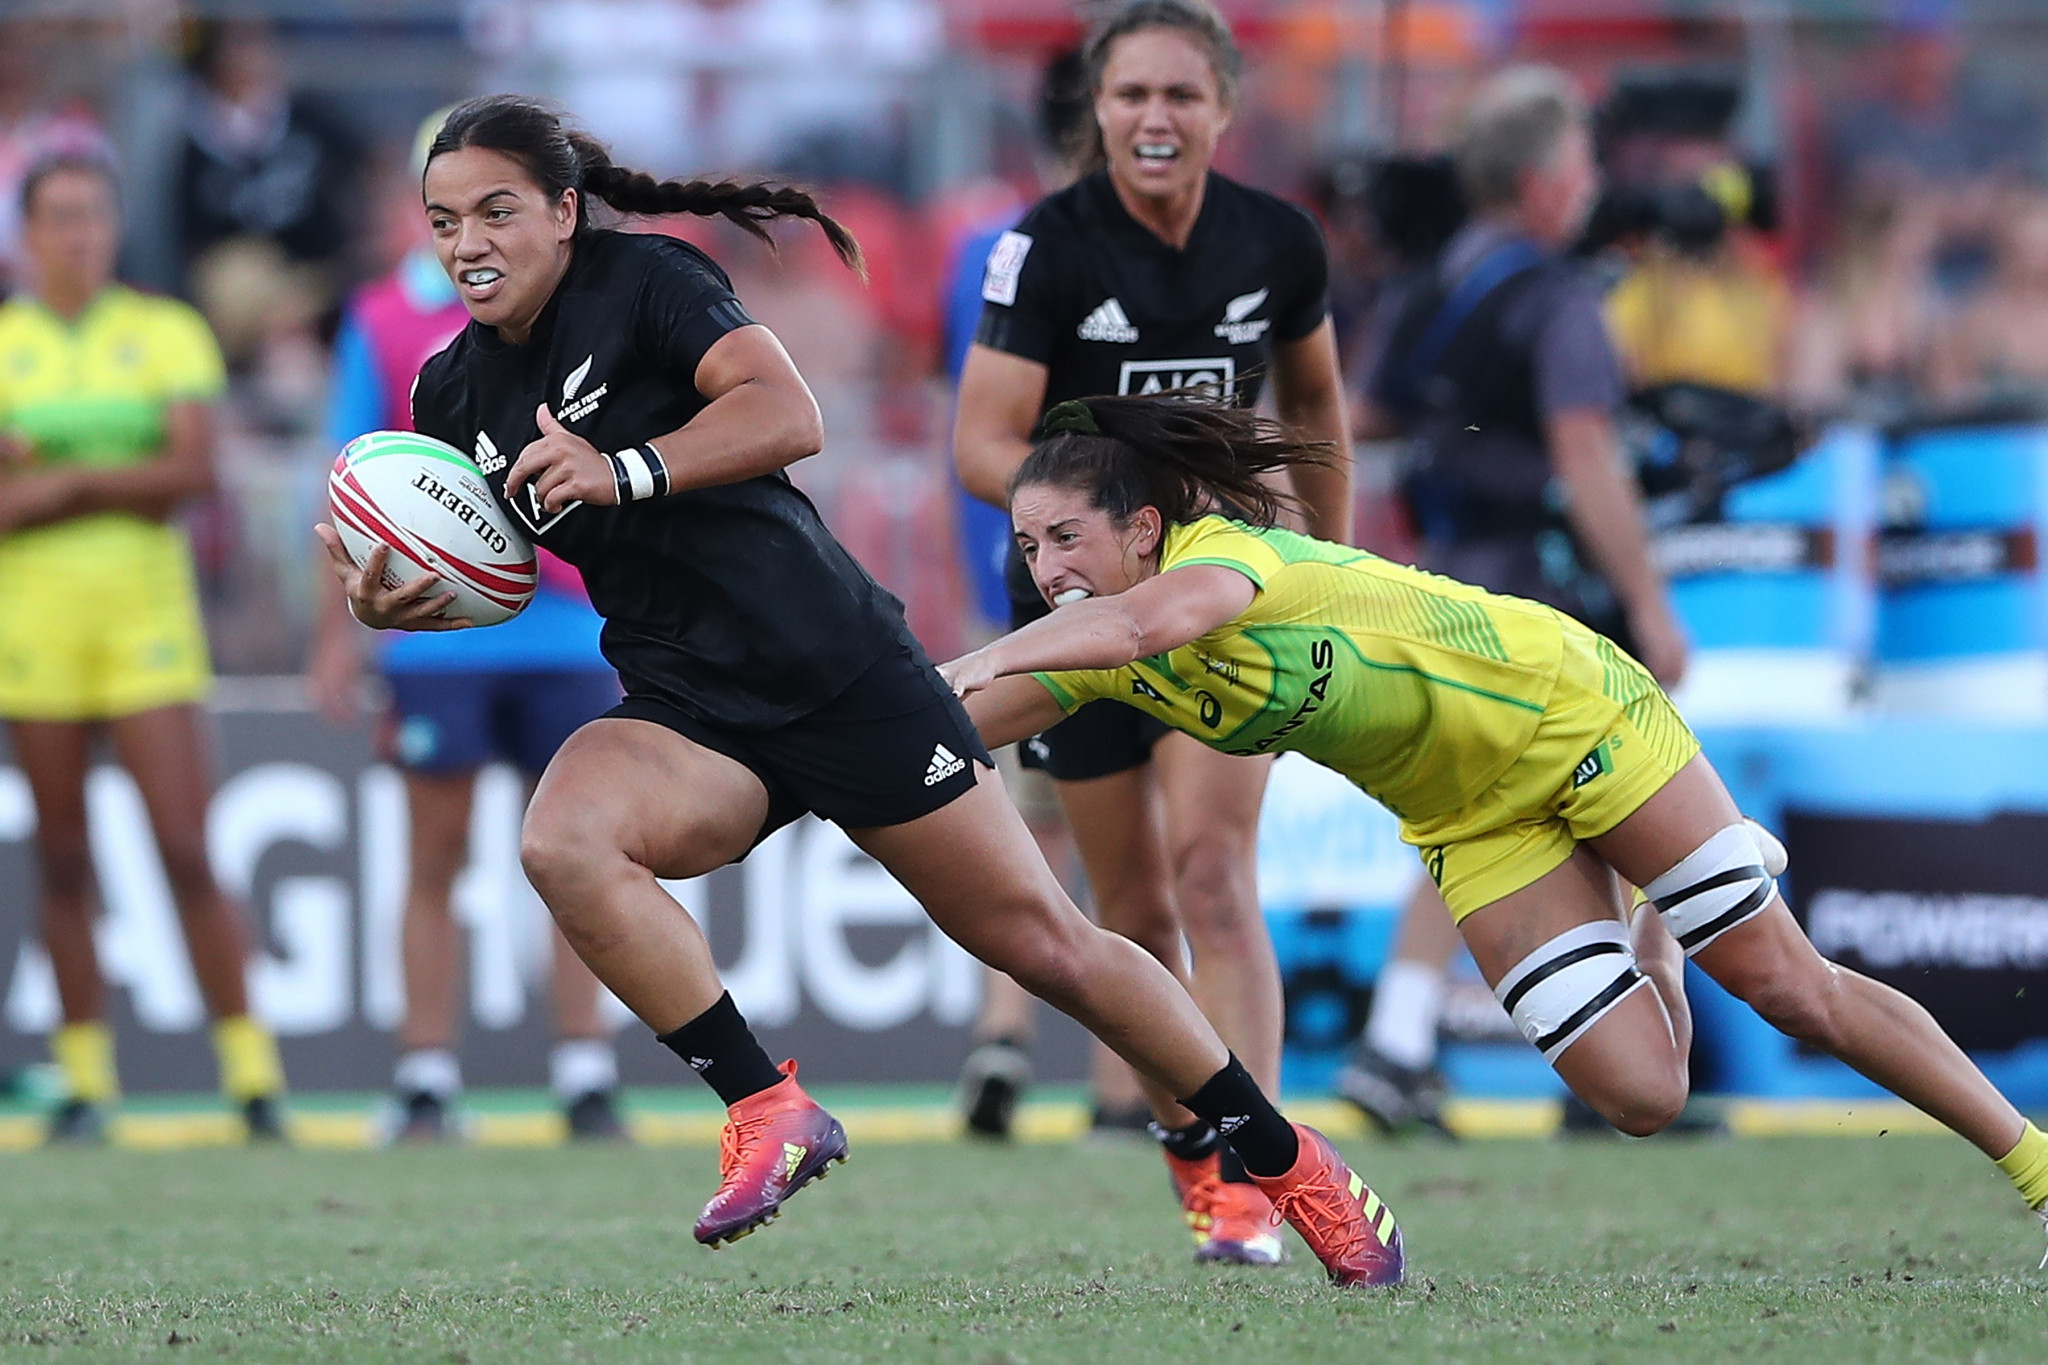 New Zealand could be set for record-breaking World Rugby Sevens Series in Kitakyushu